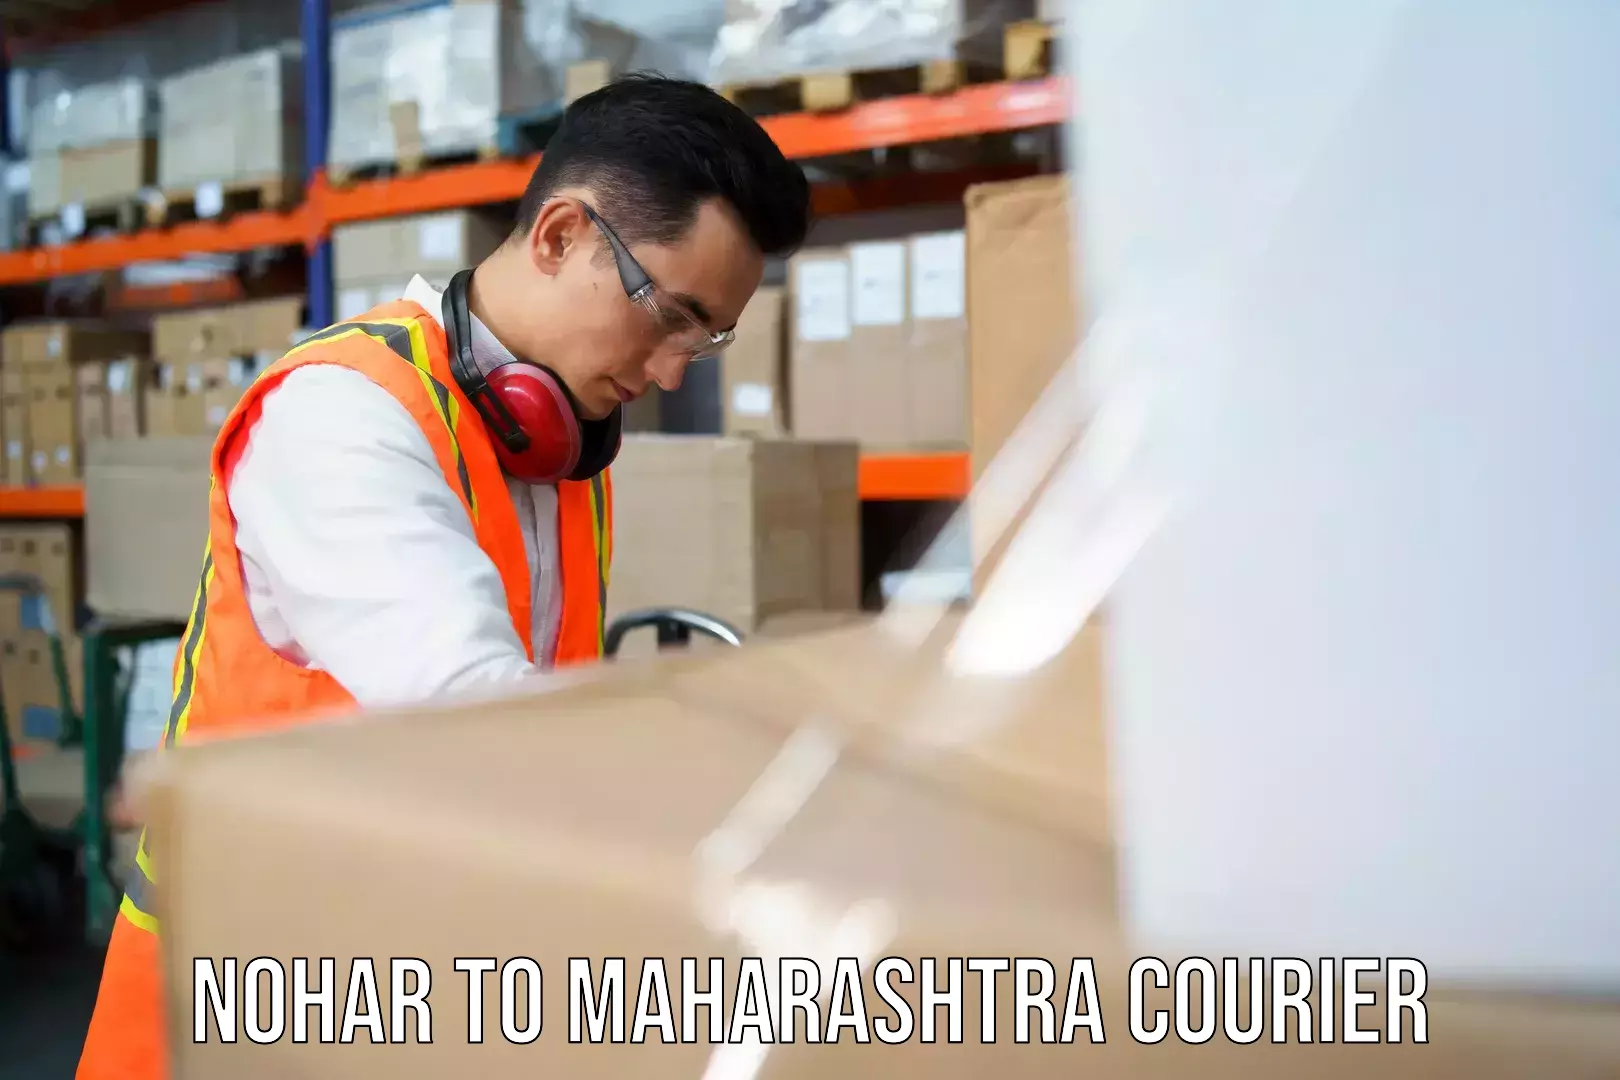 Supply chain delivery Nohar to Mahabaleshwar